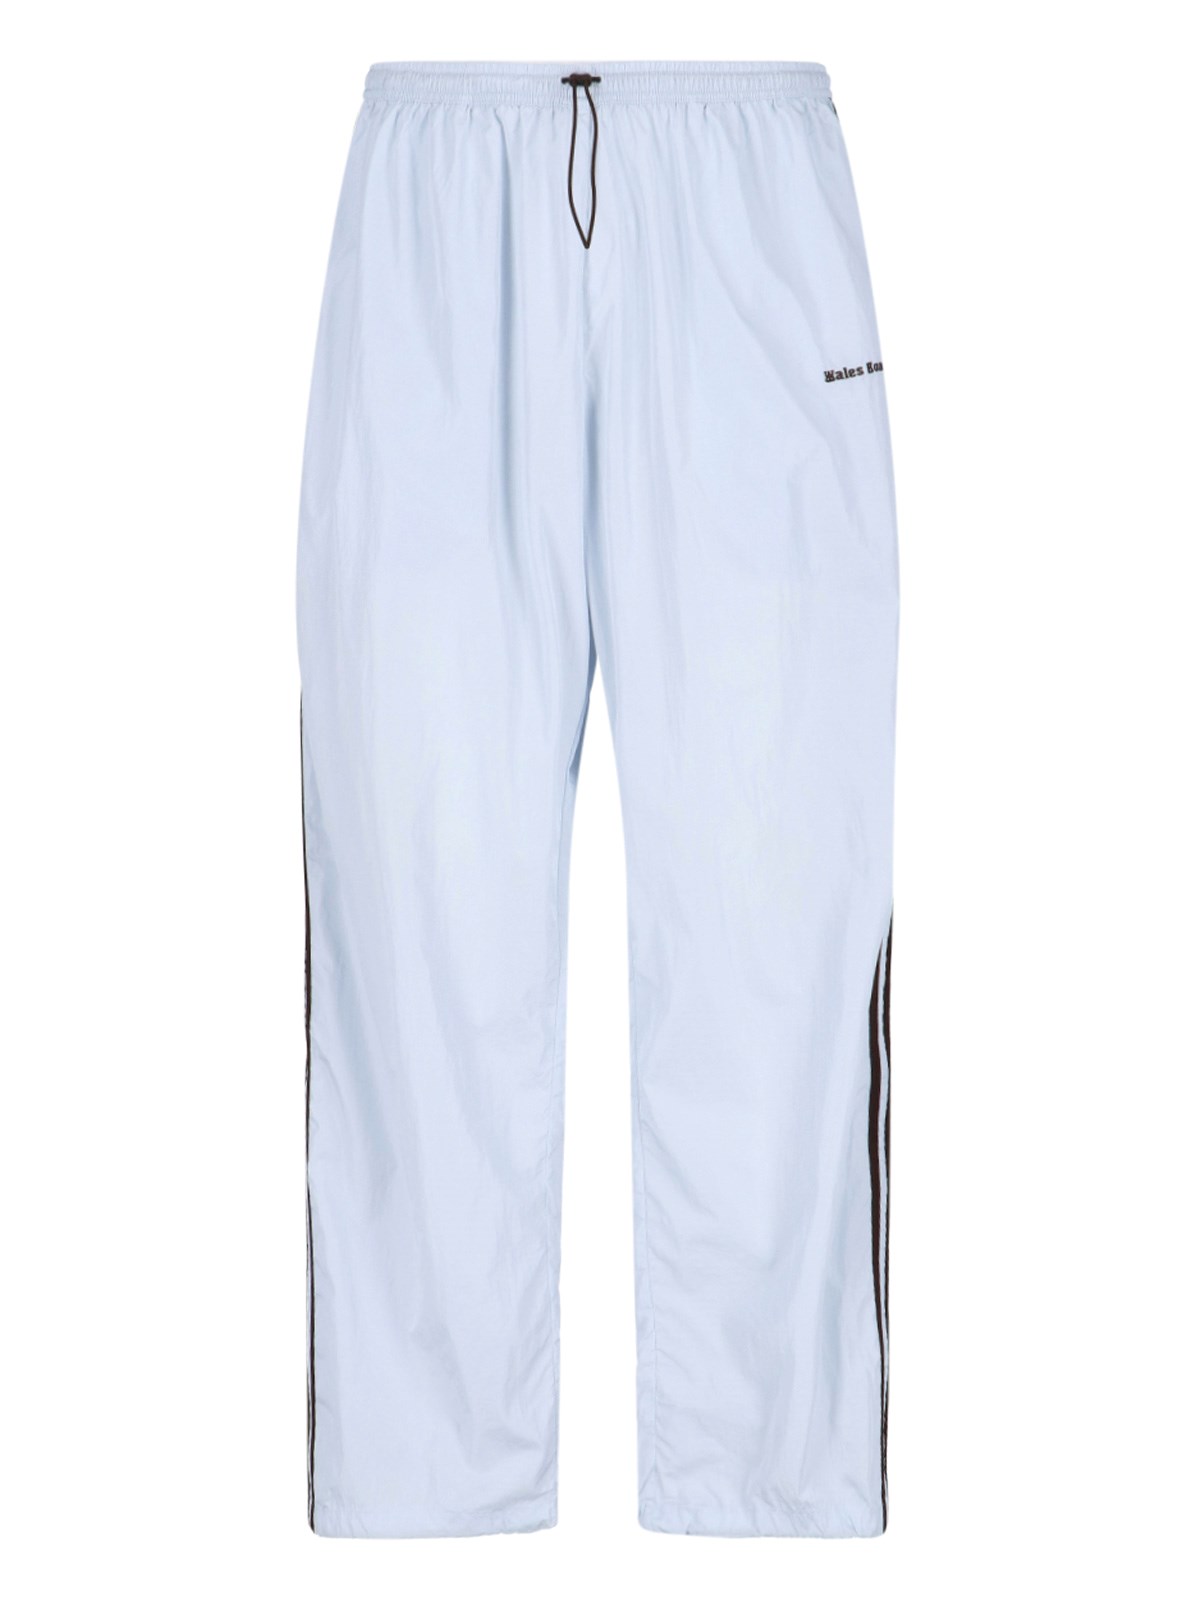 Adidas X Wales Bonner Track Pants In Light Blue